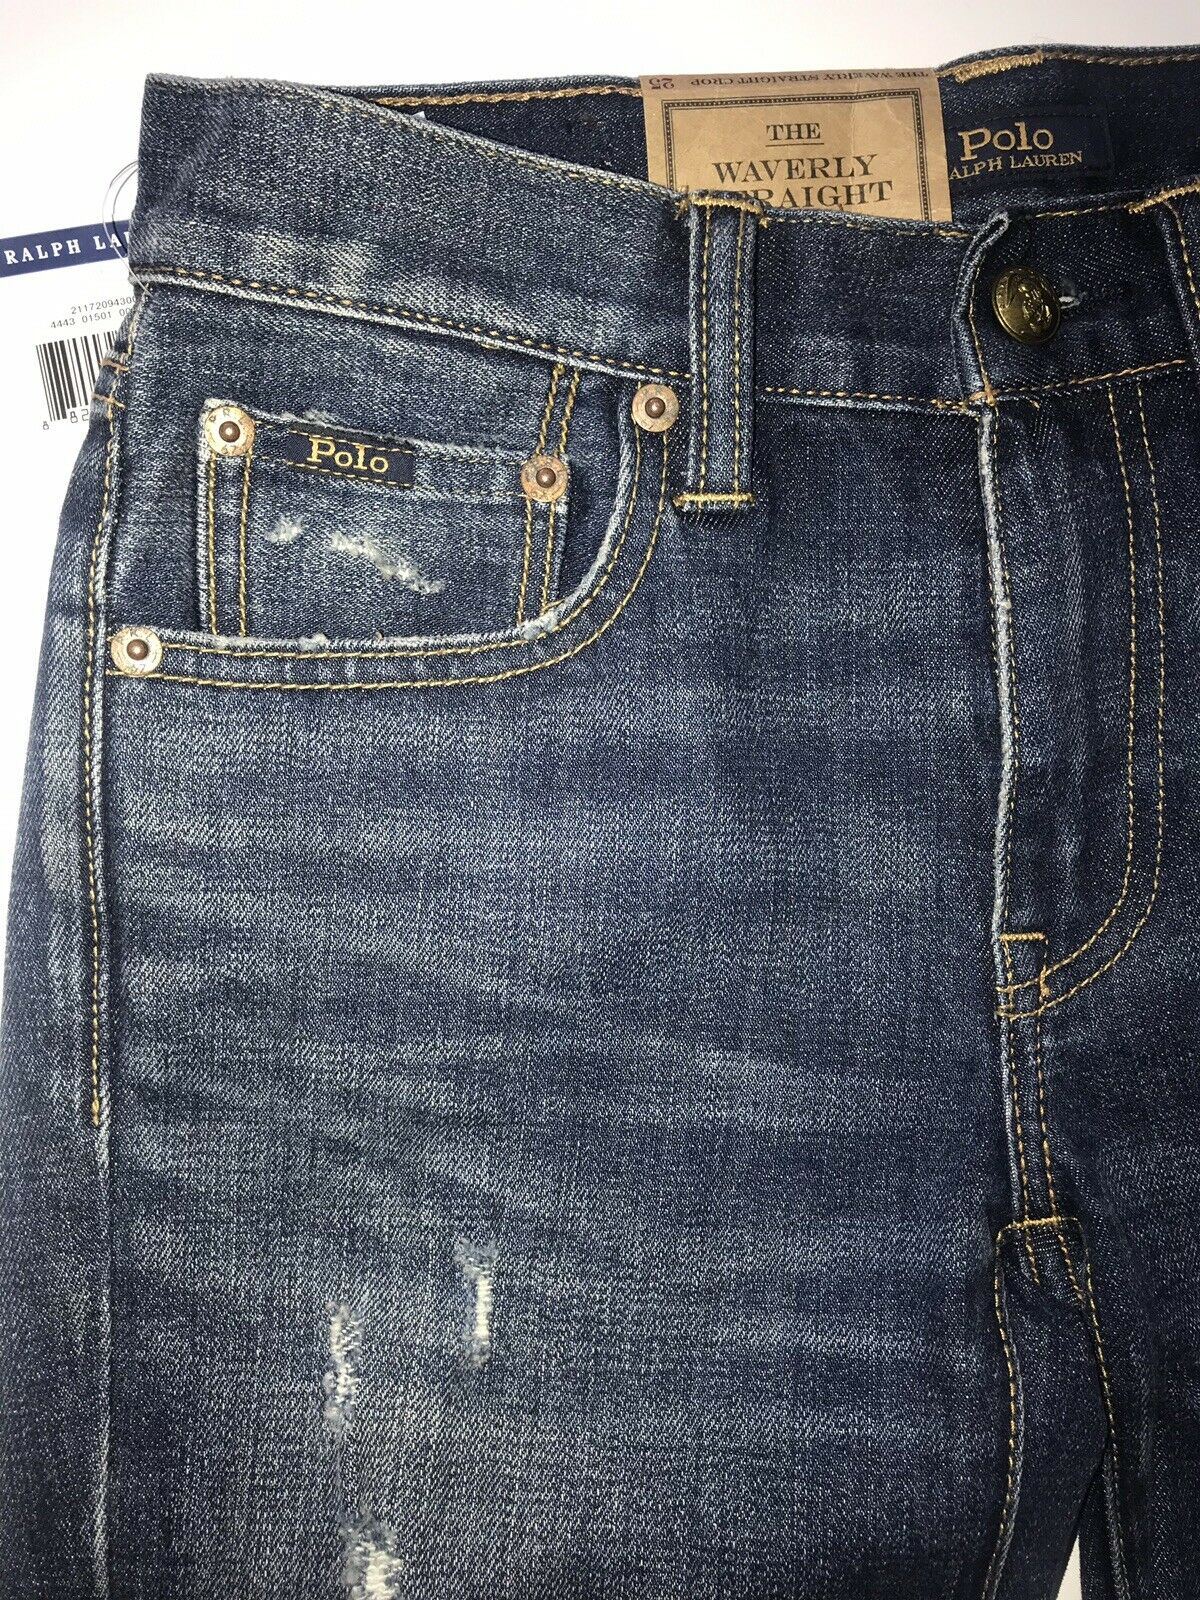 NWT $298 Polo Ralph Lauren Waverly Straight Crop Embroidered Blue Jeans Size 25